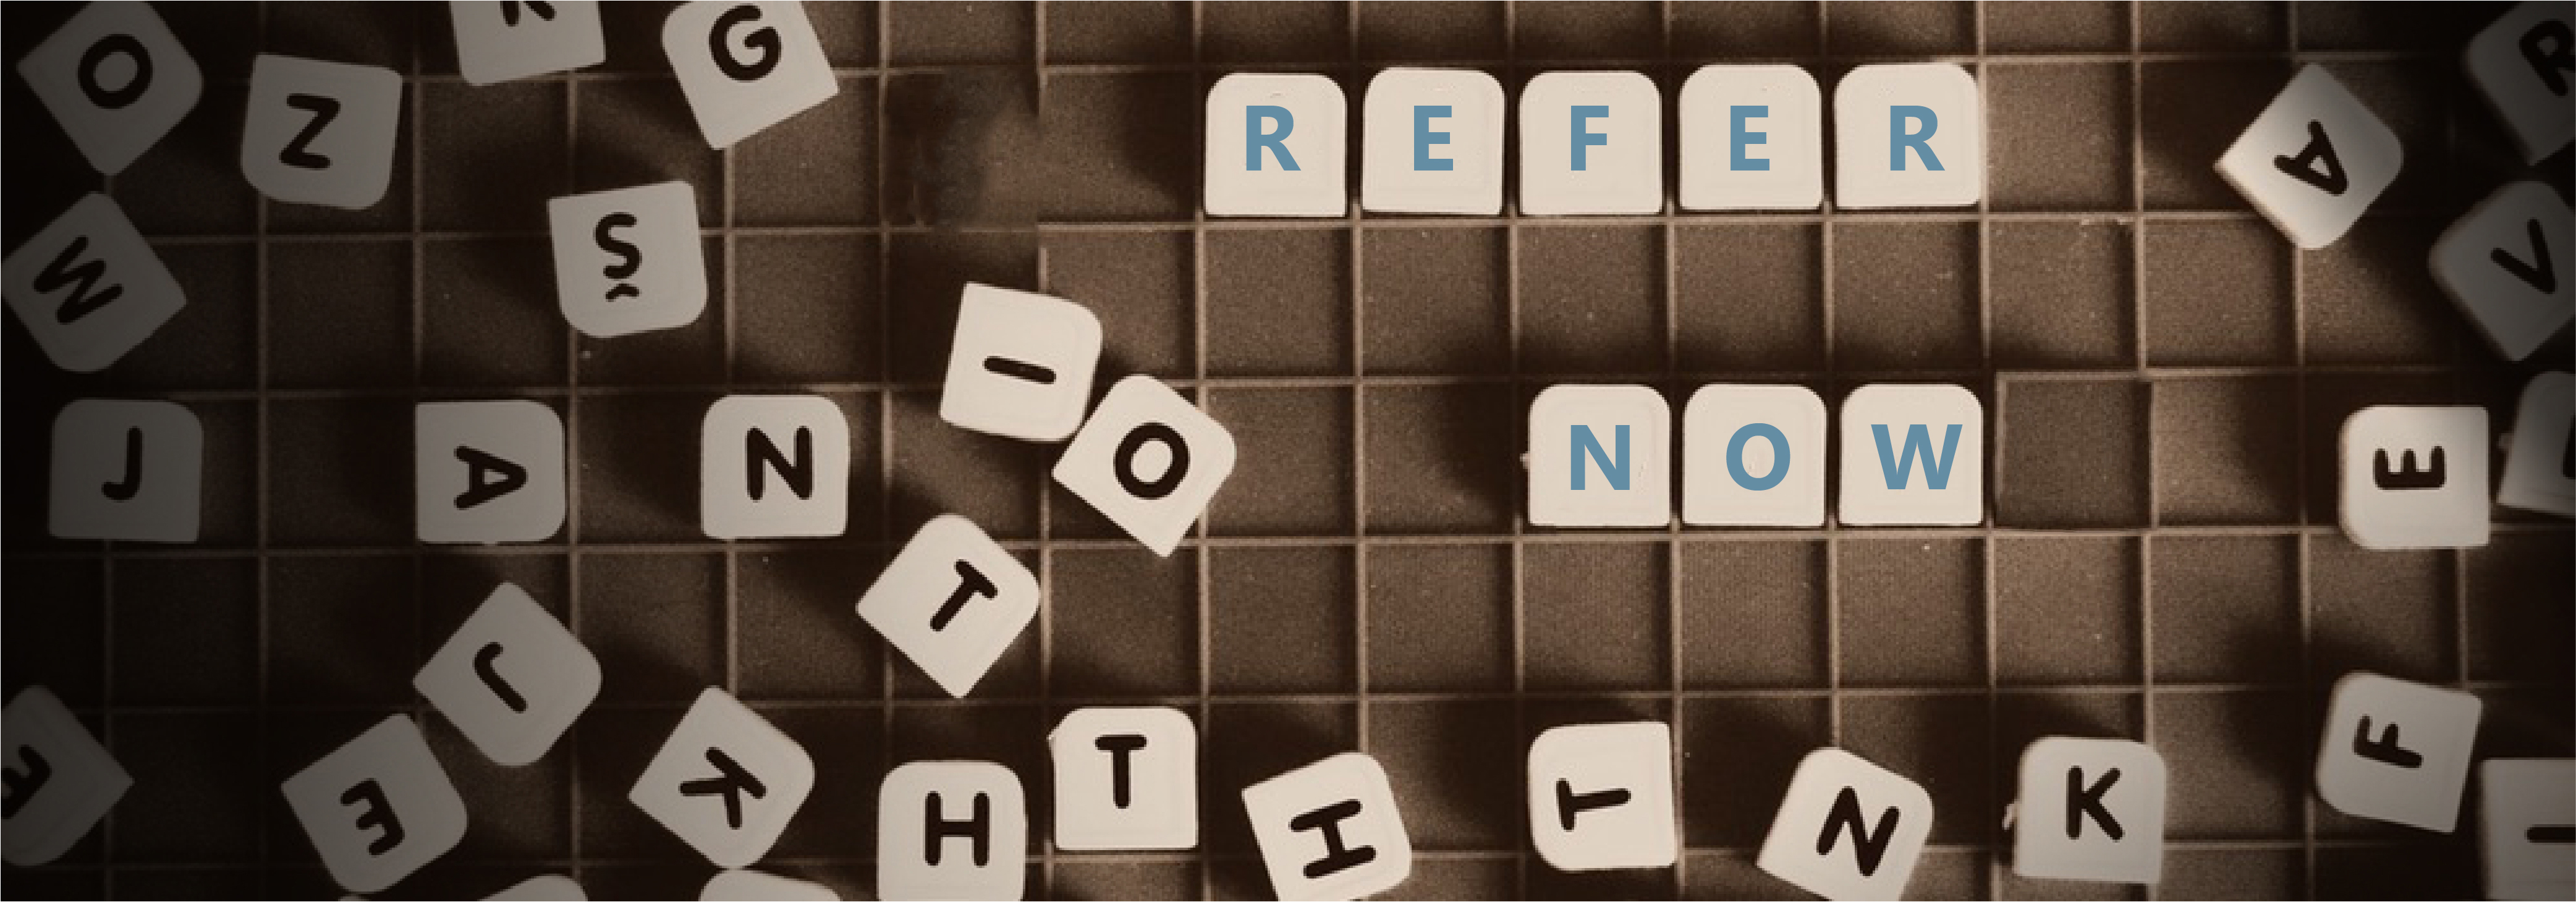 How to get customers to refer now by optimizing referral marketing program messaging